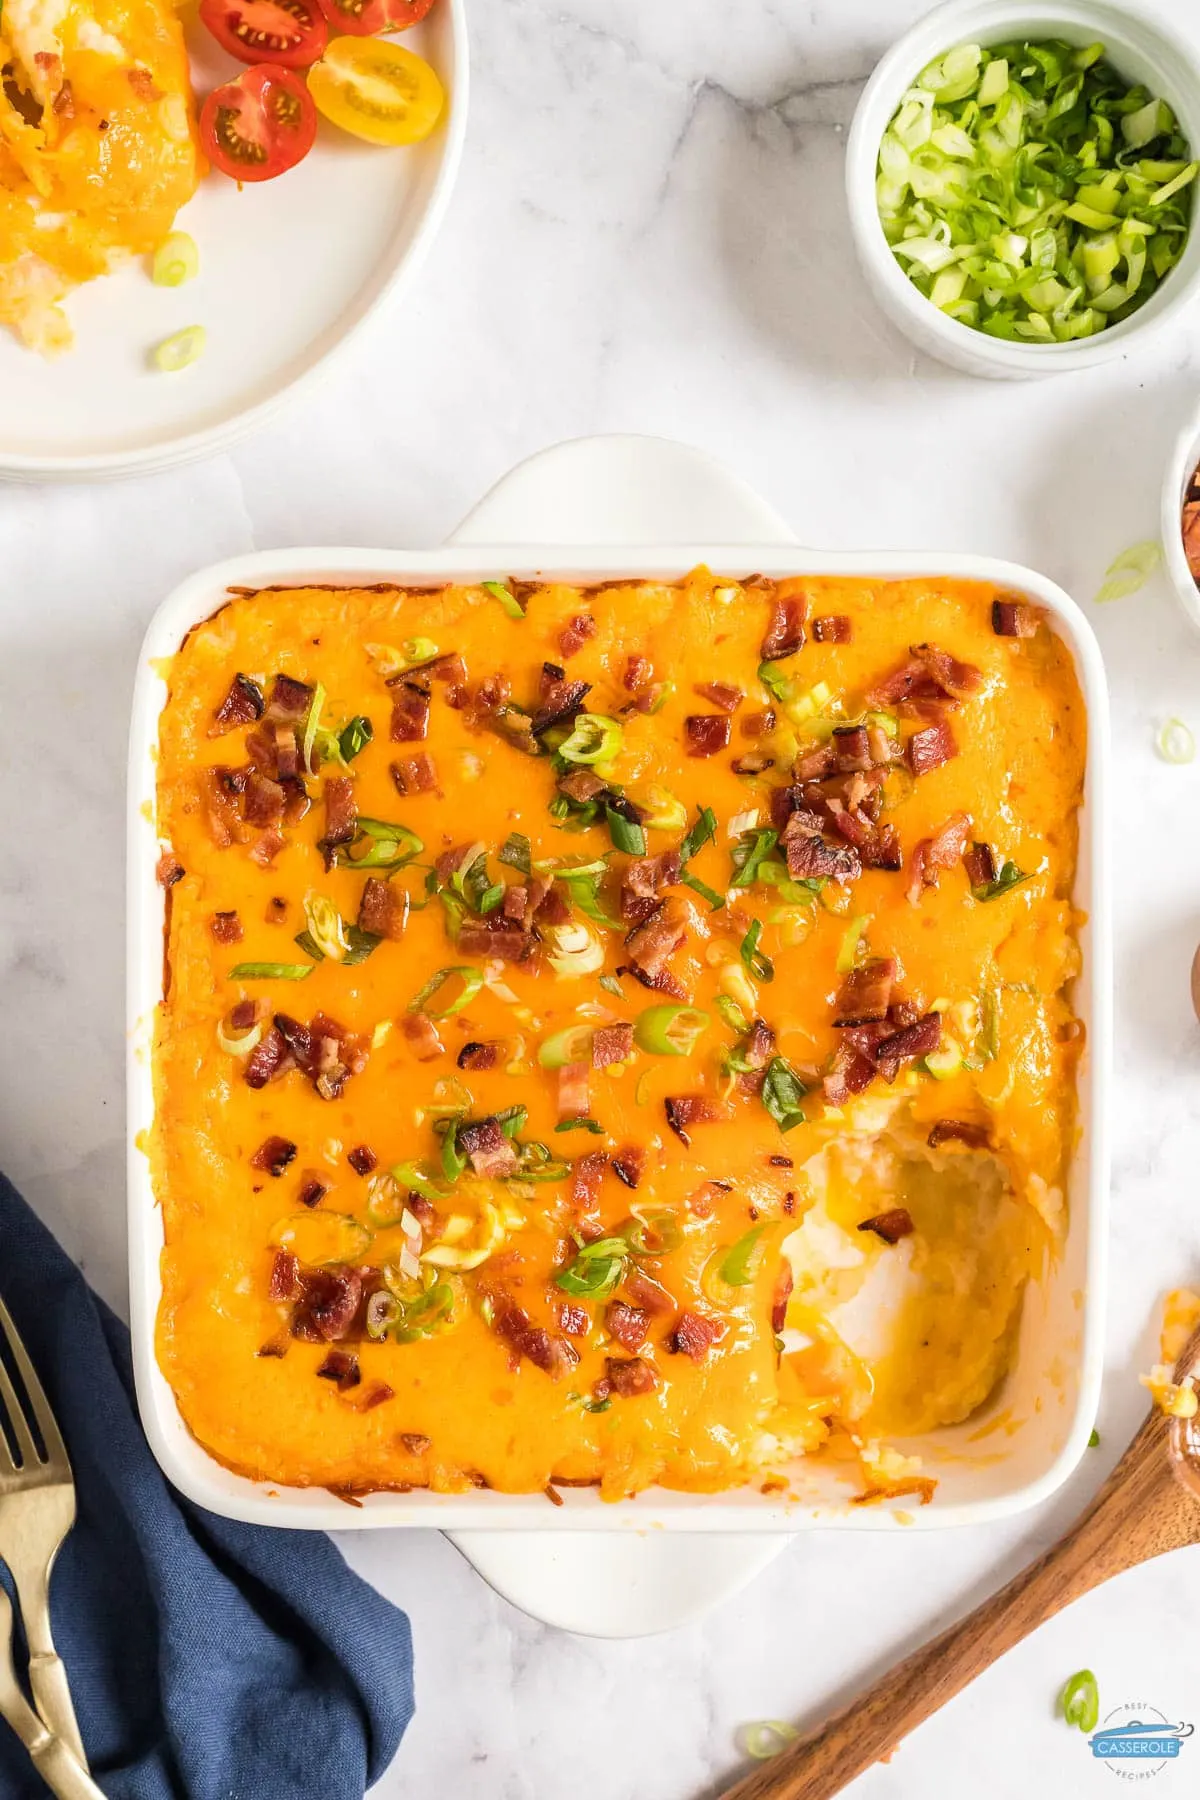 twice baked potato casserole with a scoop missing